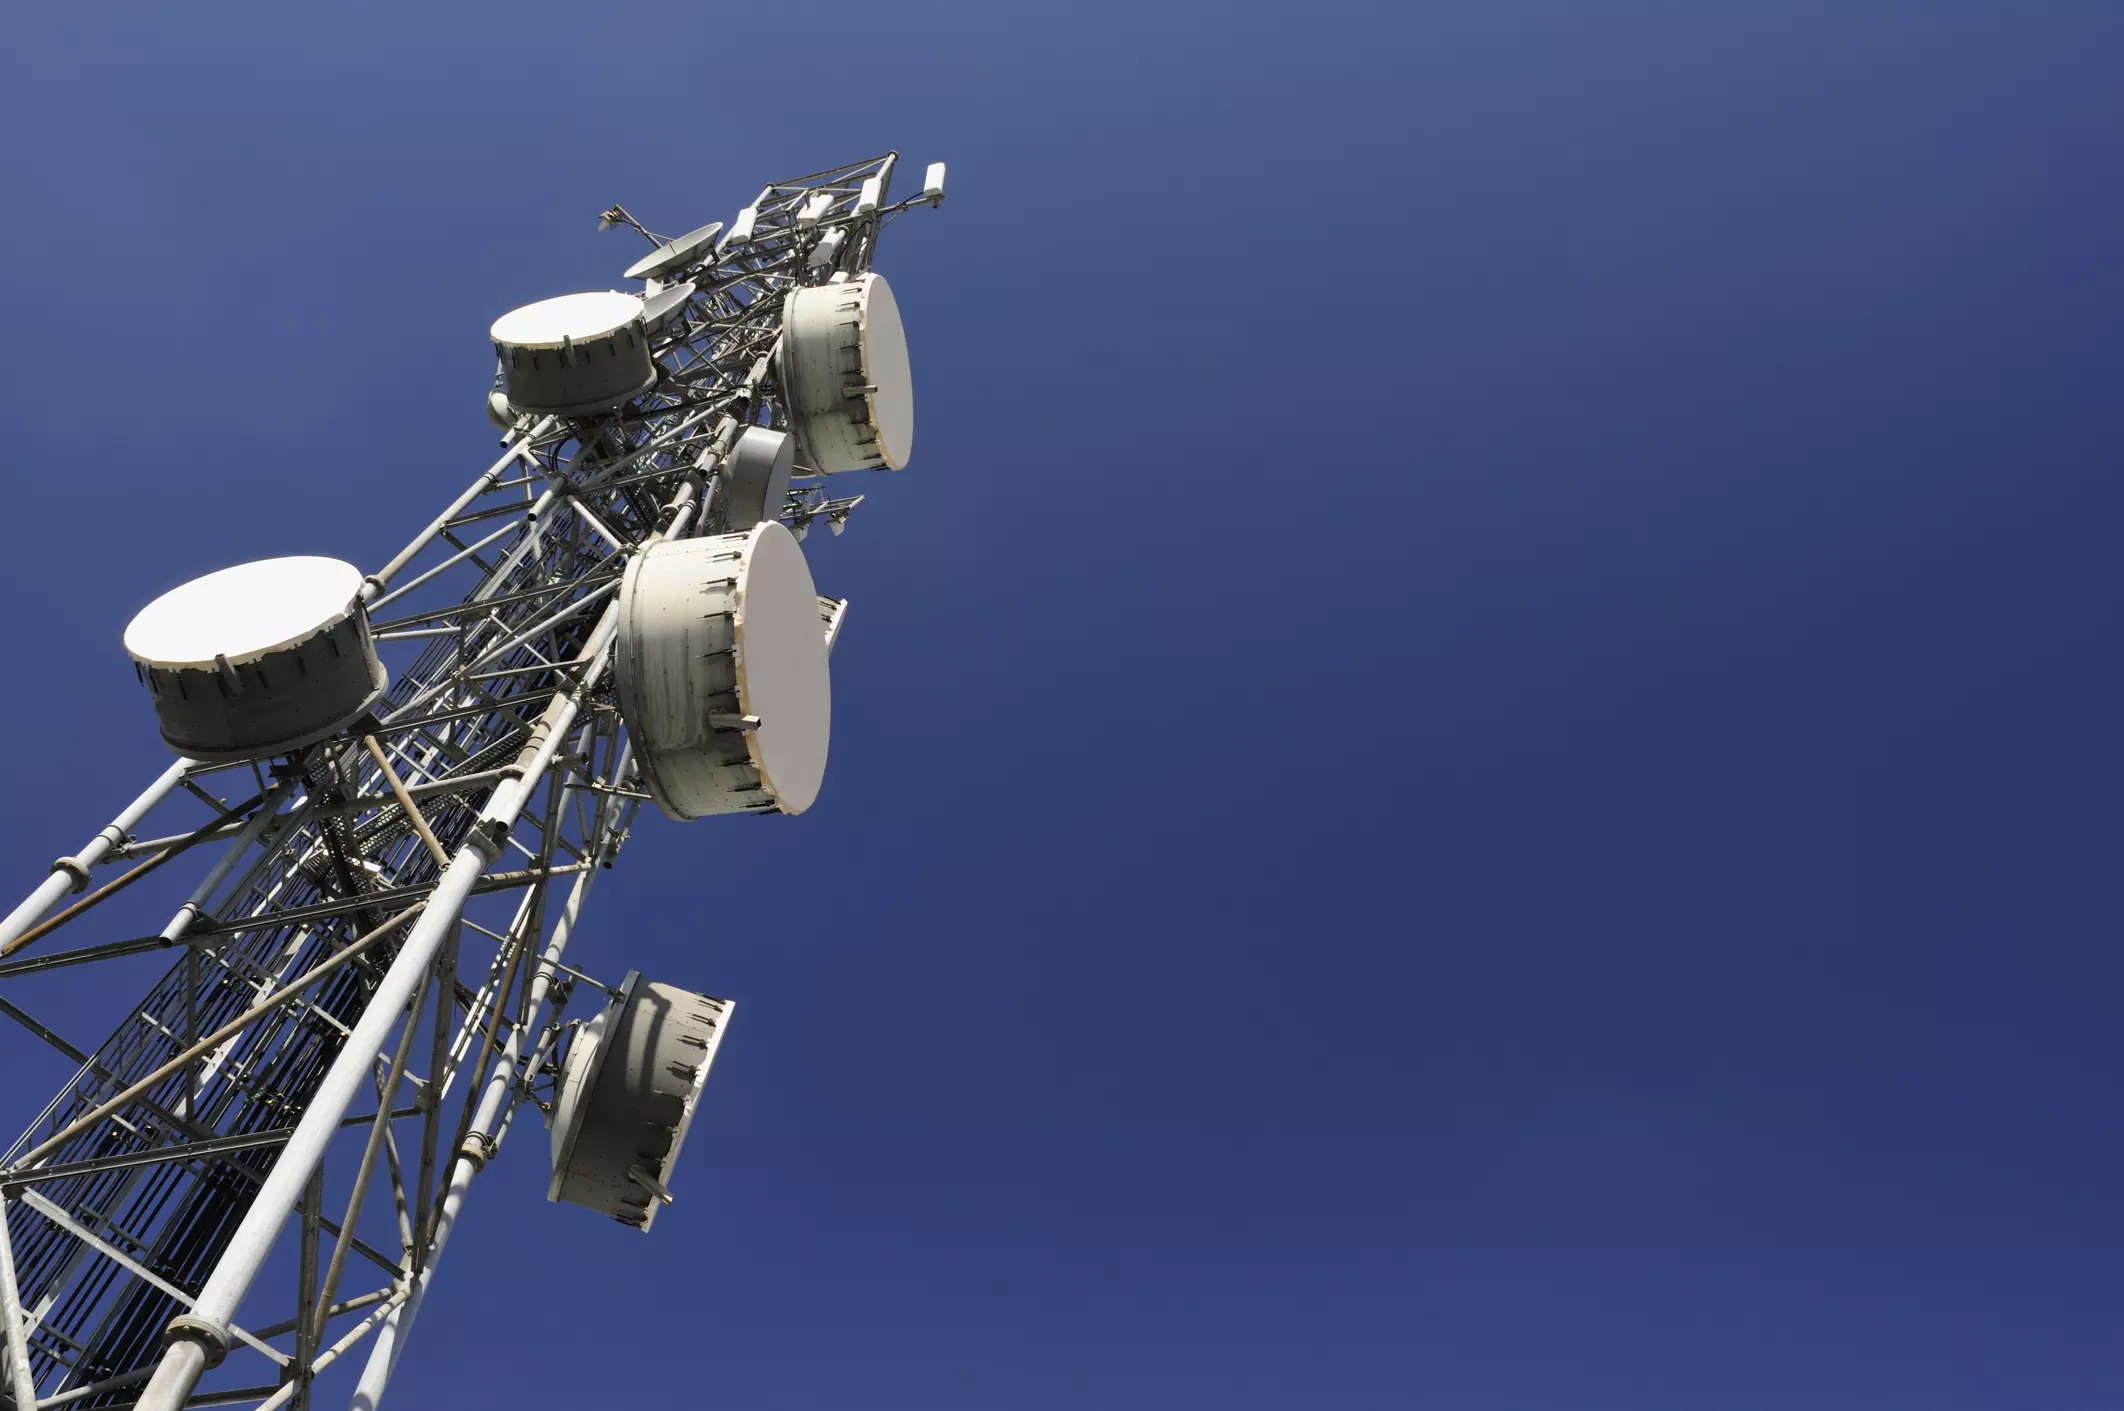 Most telecoms want price reduction in 40GHz spectrum band 